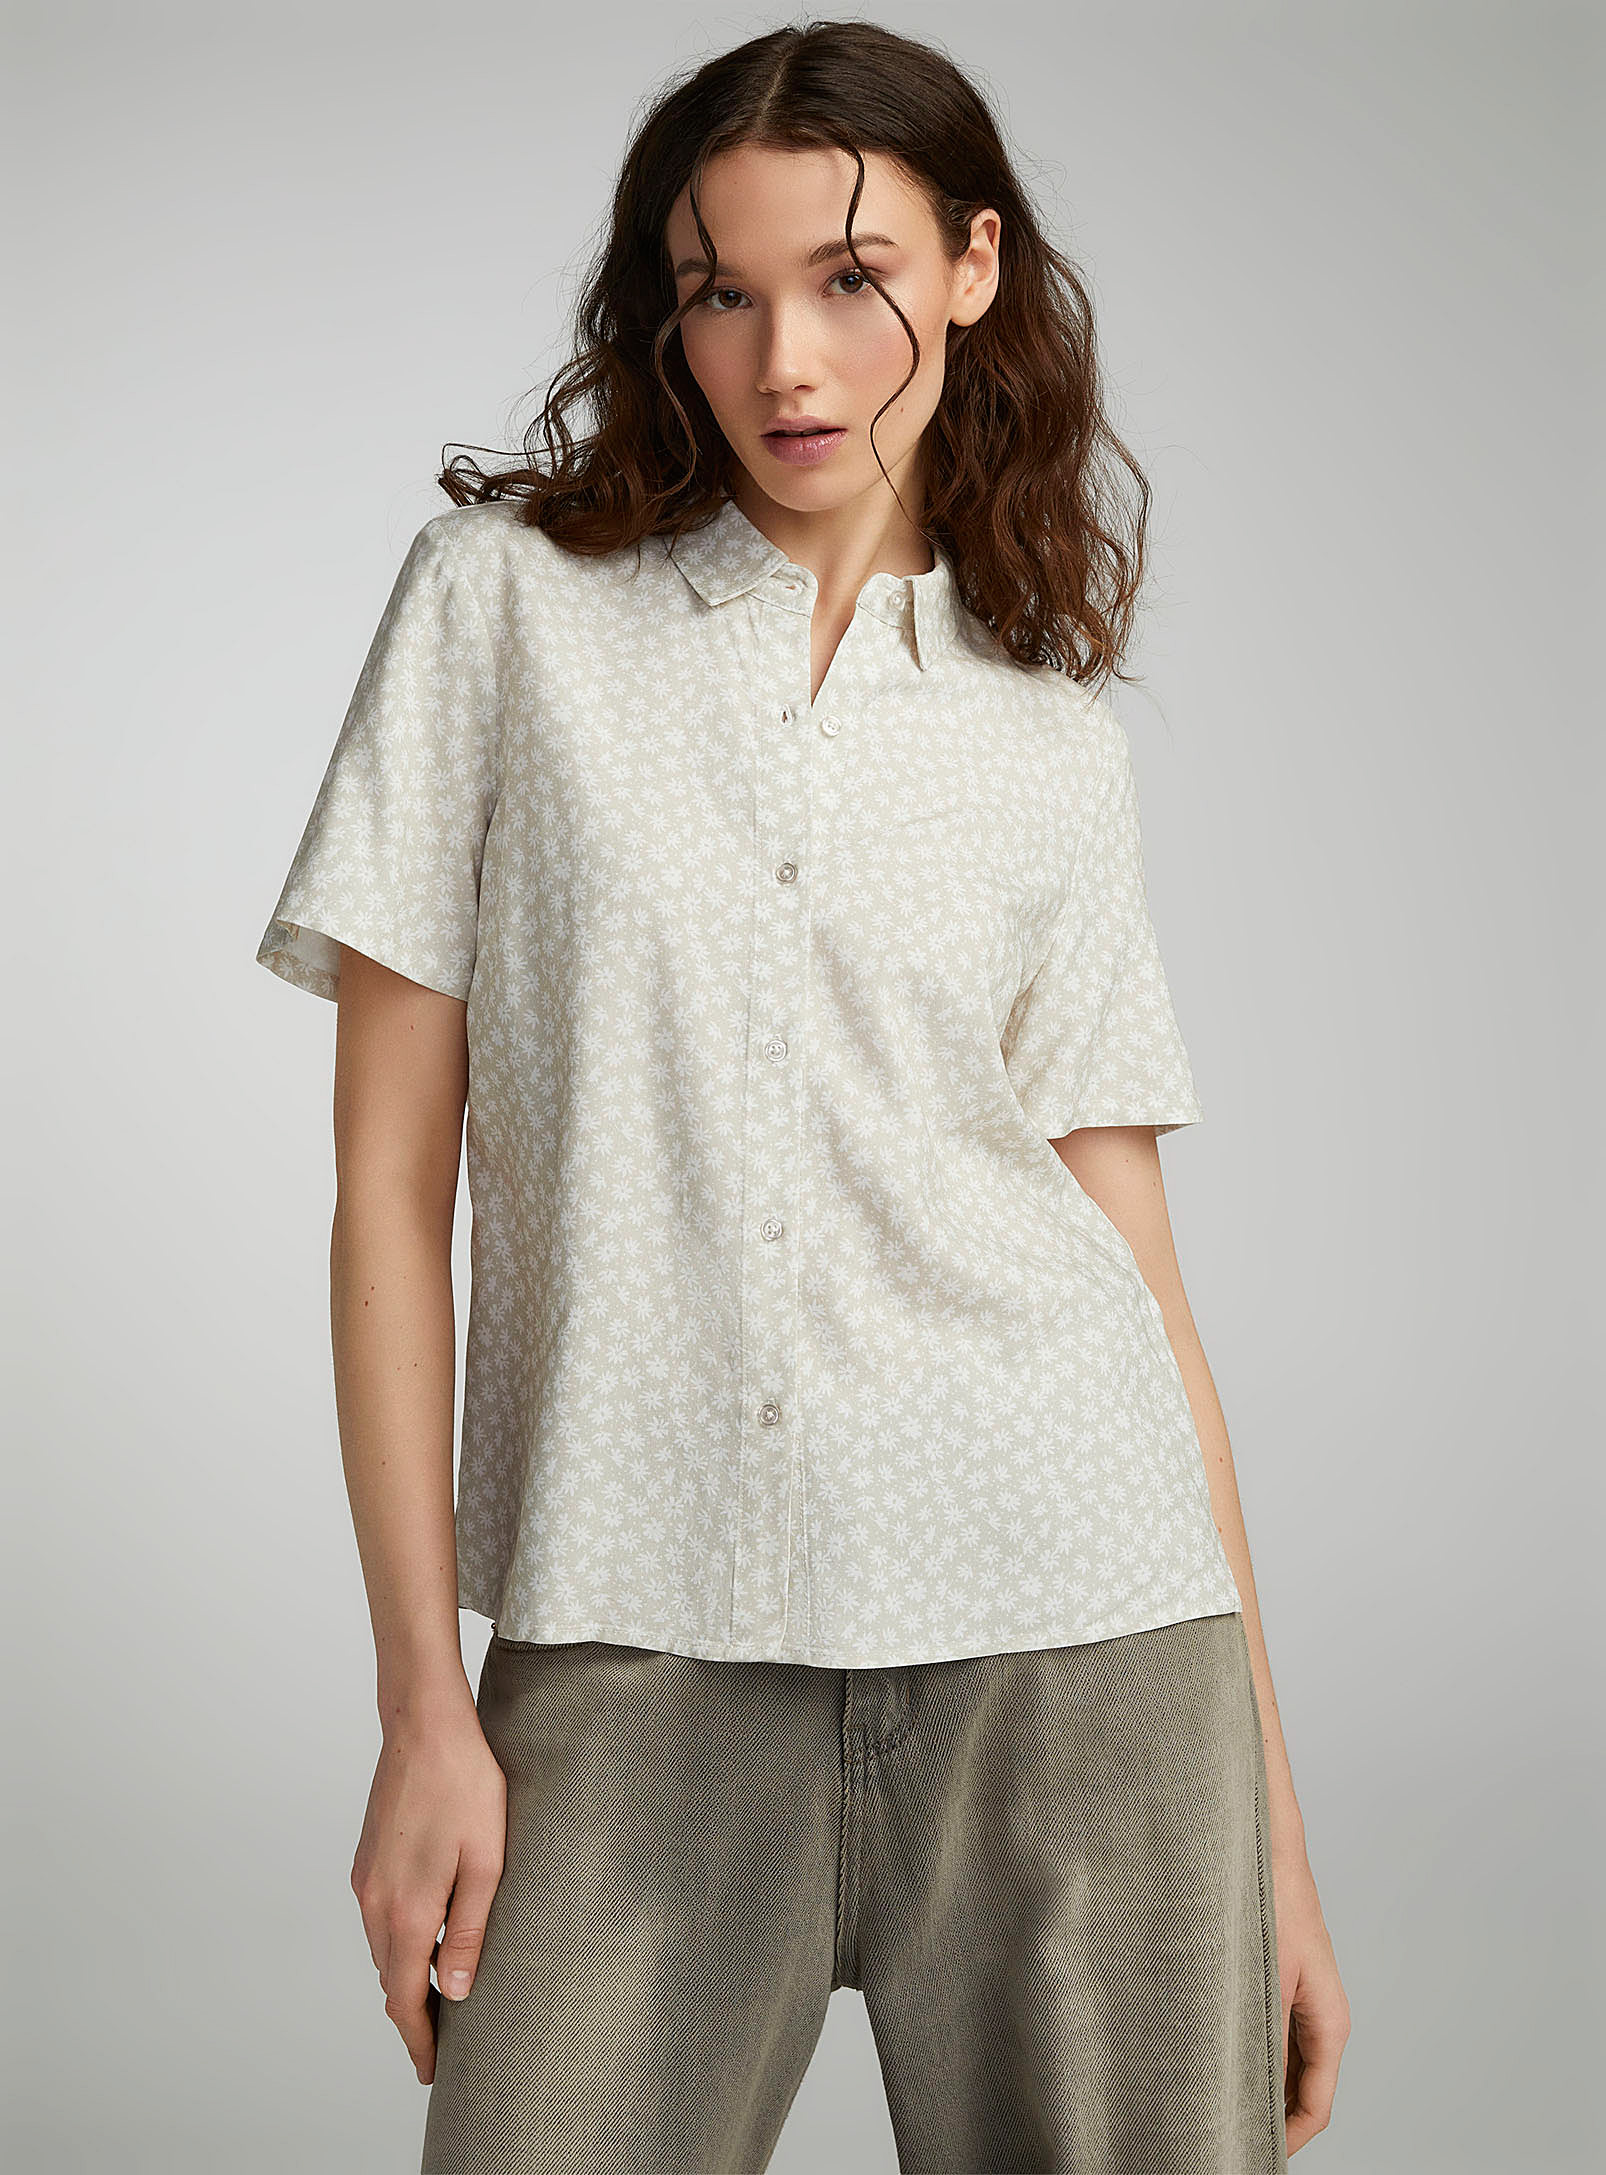 Twik Printed Fluid Shirt In Patterned White